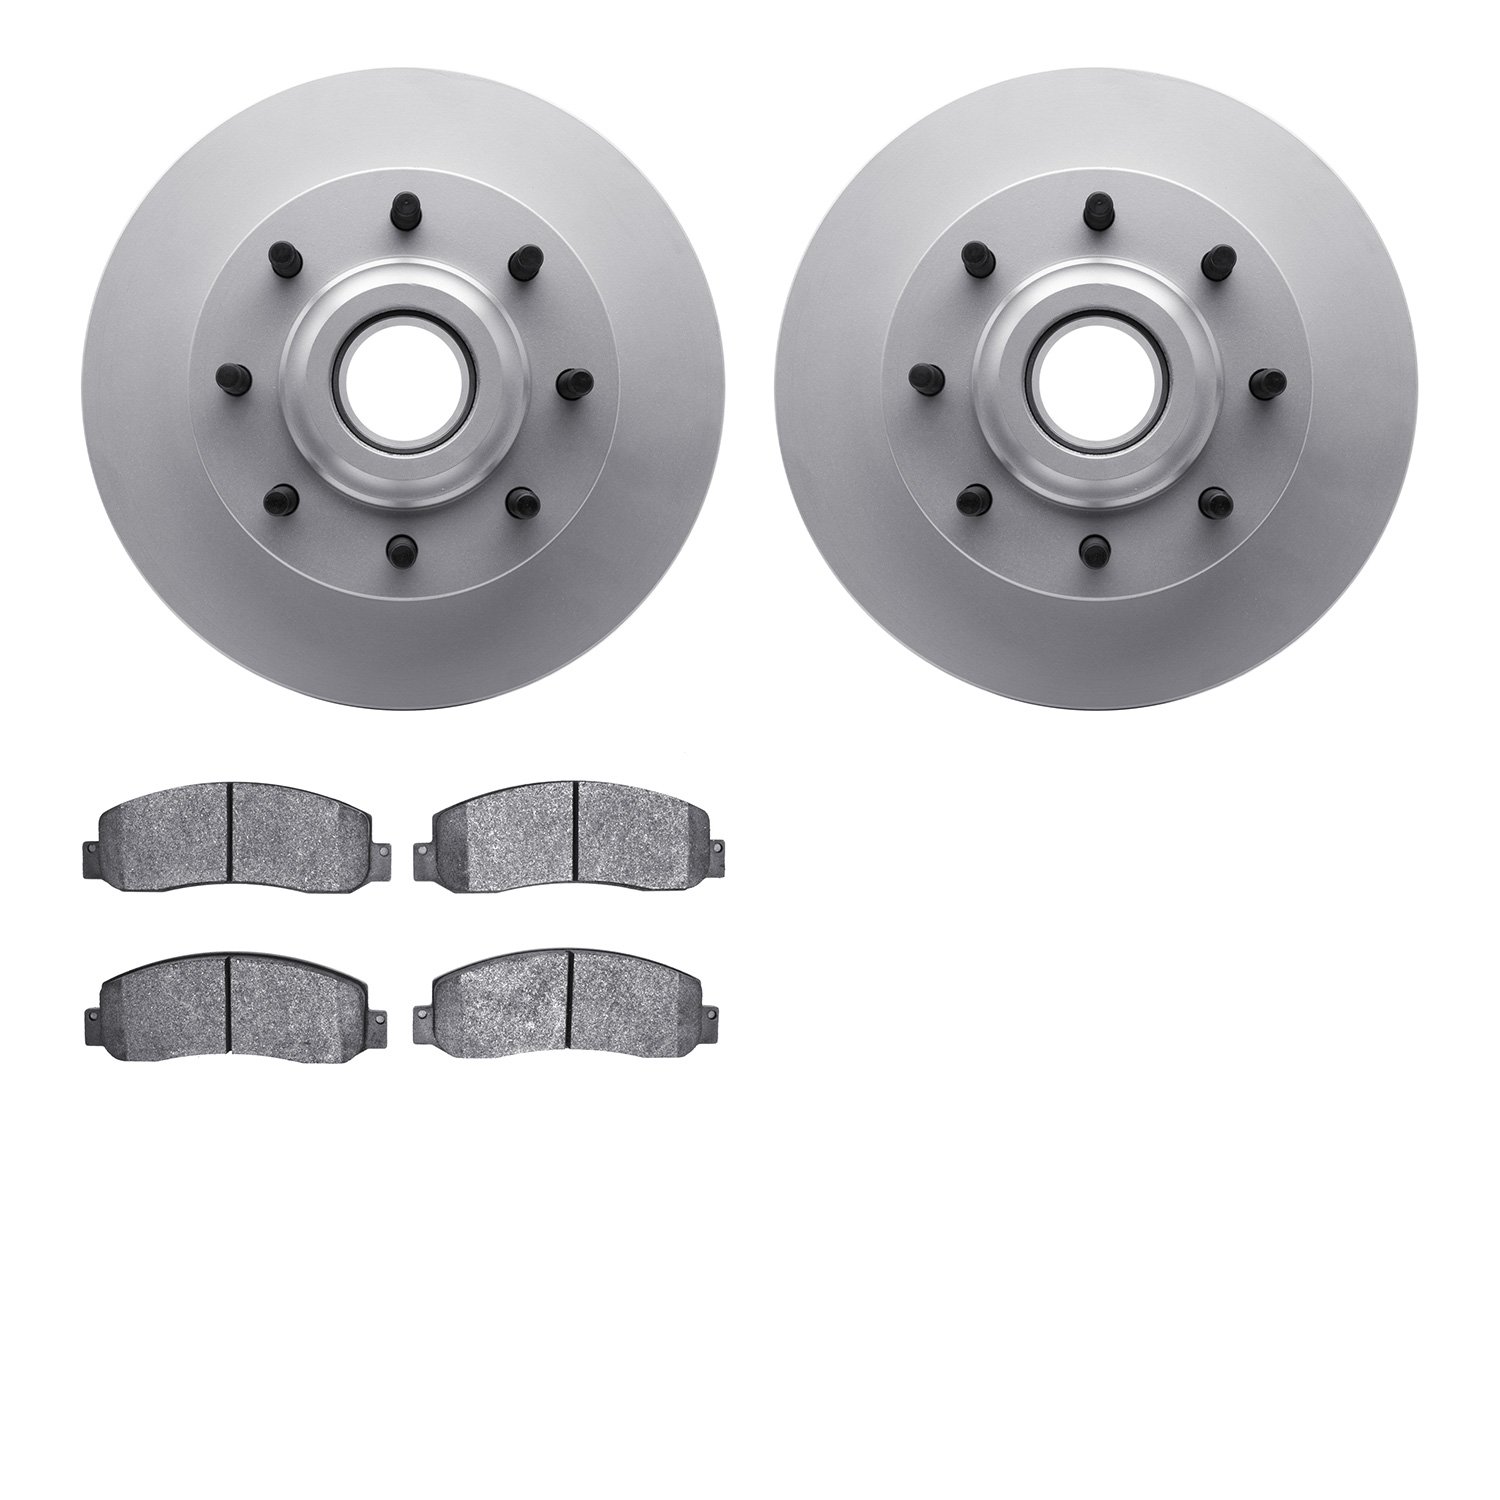 4402-54063 Geospec Brake Rotors with Ultimate-Duty Brake Pads Kit, 2006-2012 Ford/Lincoln/Mercury/Mazda, Position: Front